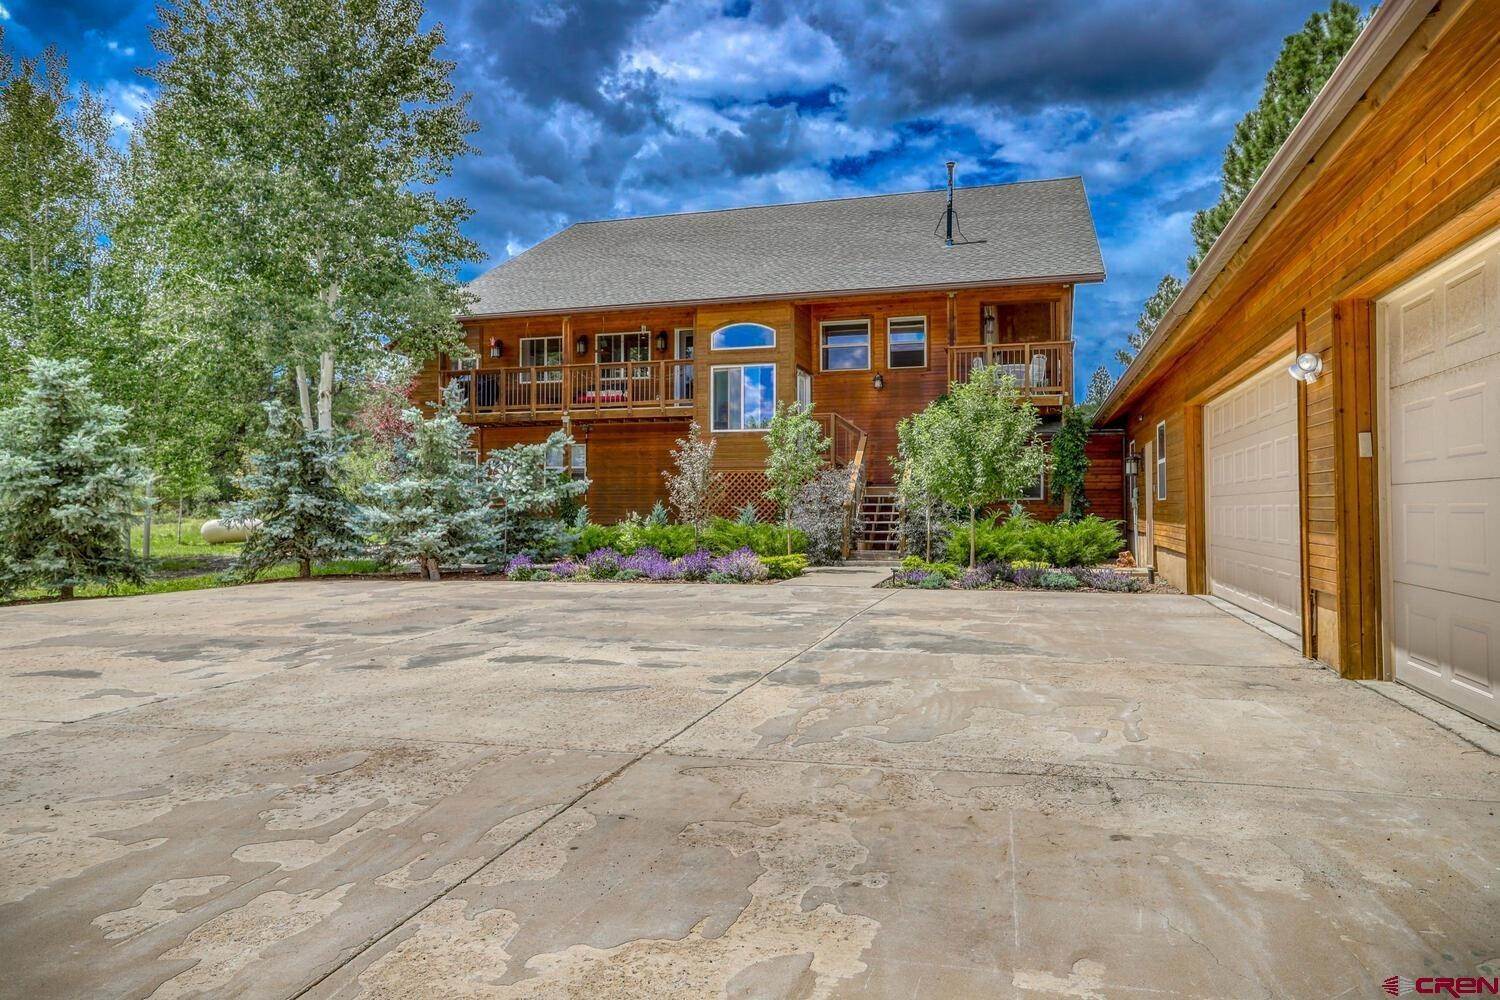 Single Family Homes for Active at 869 Hatcher Circle Pagosa Springs, Colorado 81147 United States